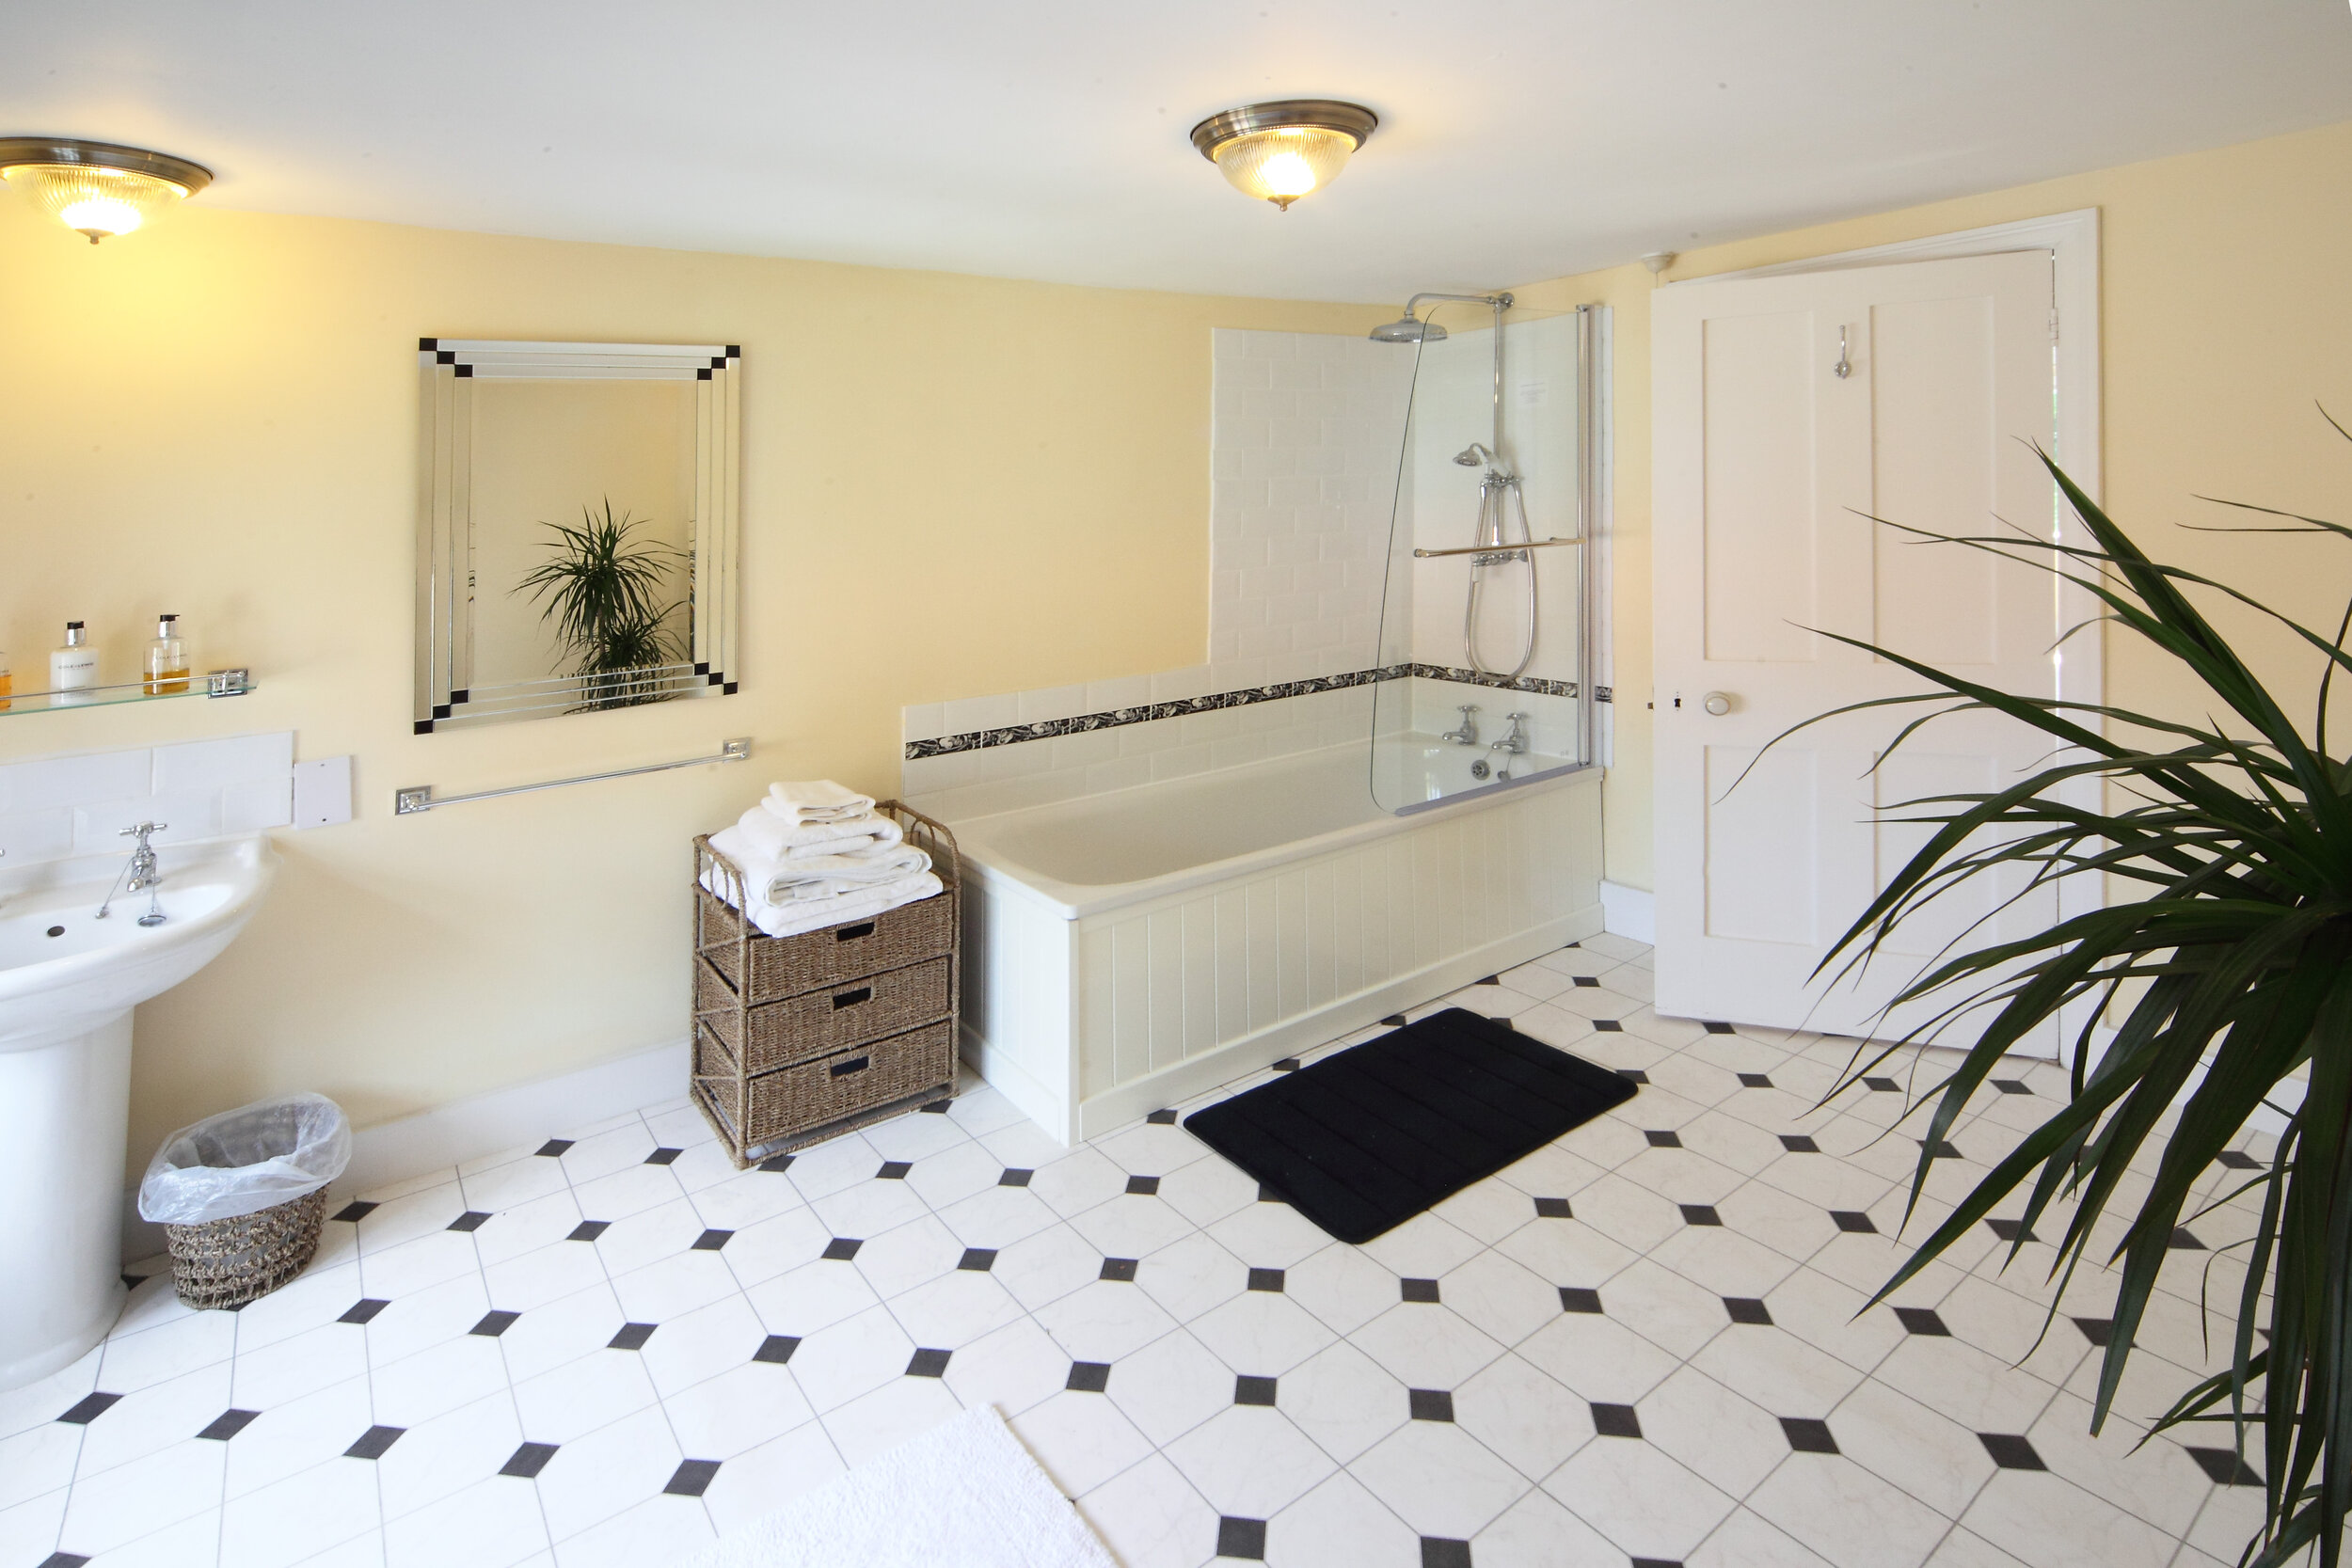 A large Private Bathroom-Bawdsey Hall-Suffolk-UK